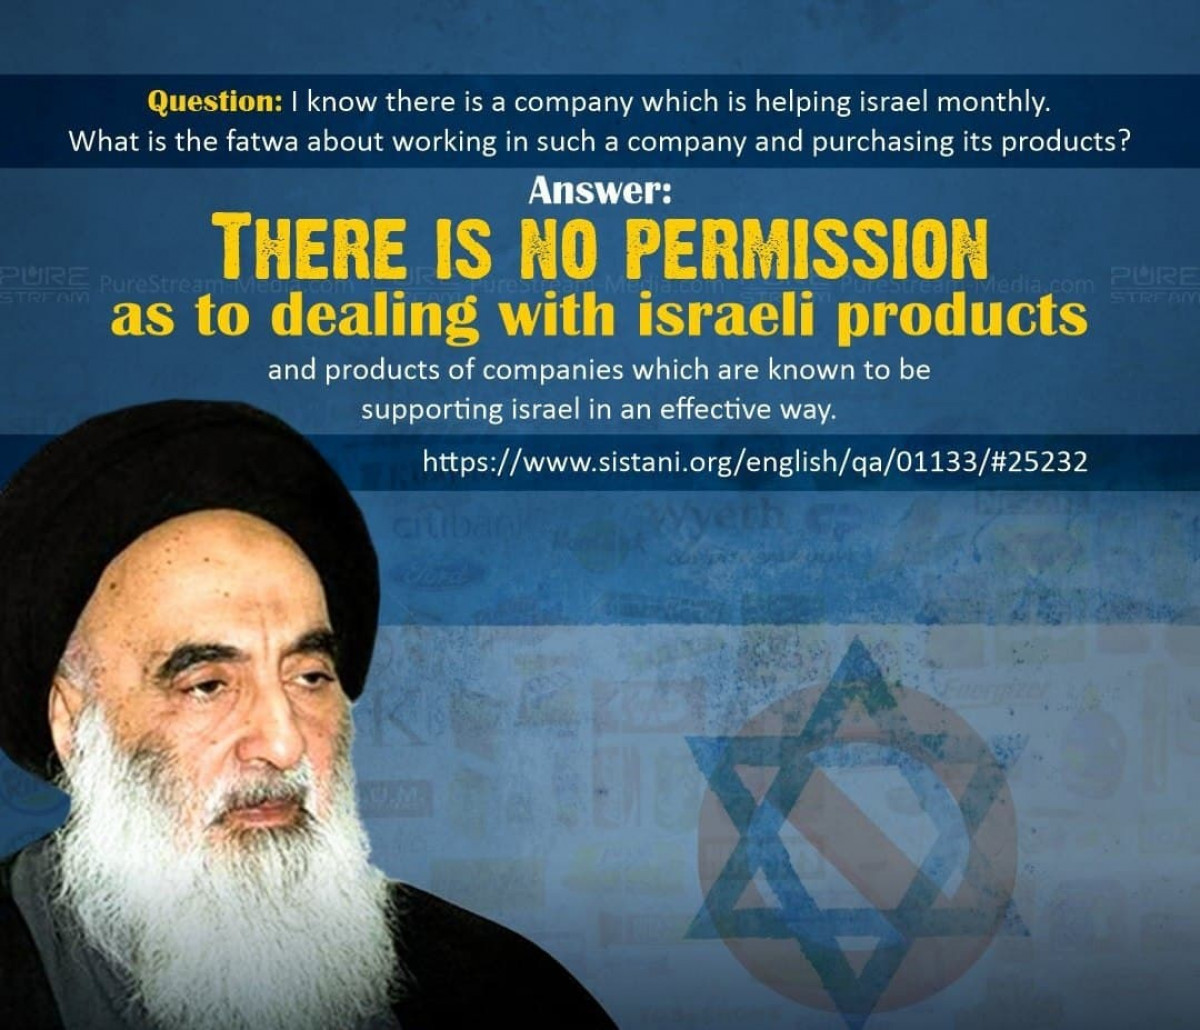 There is no permission as to dealing with Israeli products